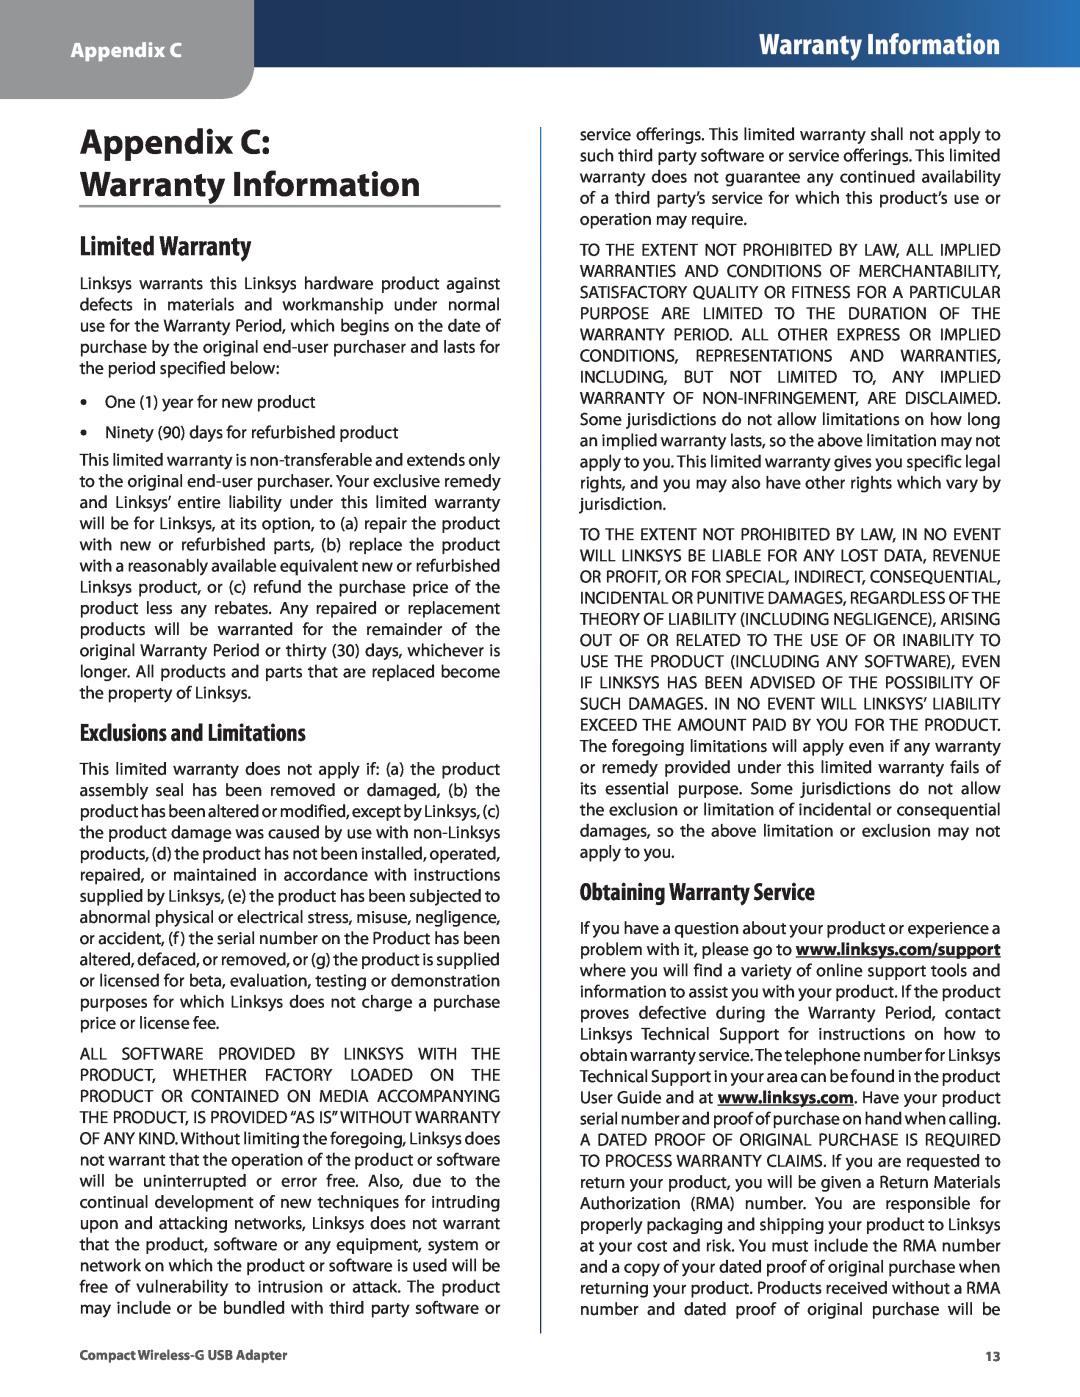 Cisco Systems WUSB54GC manual Appendix C Warranty Information, Limited Warranty, Exclusions and Limitations 